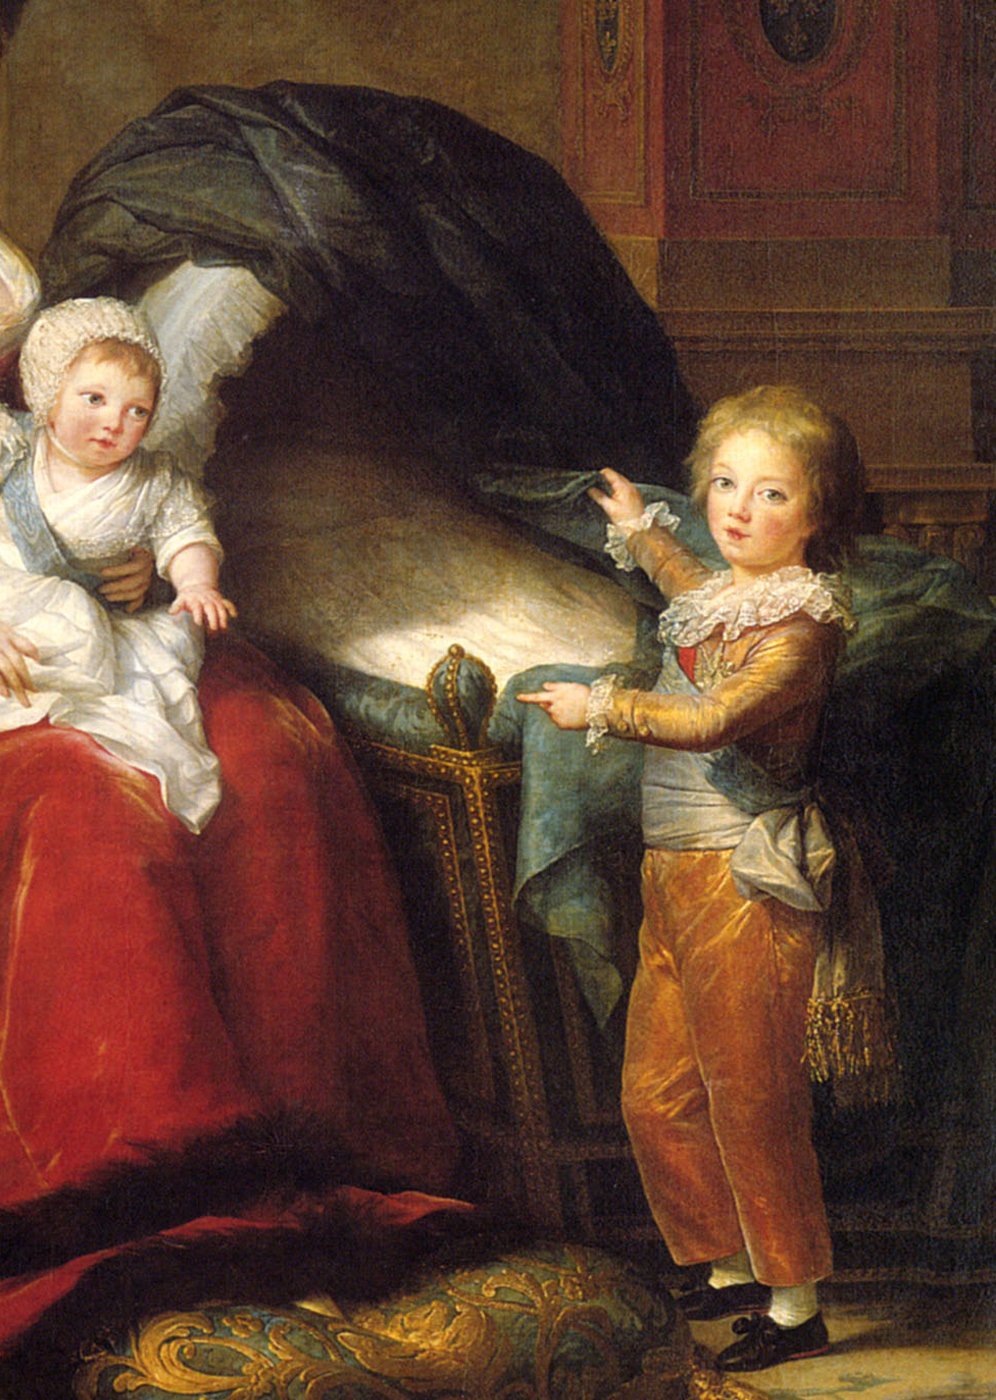 "Marie-Antoinette and her children", Élisabeth Vigée Le Brun, 1788, Collection of the Palace of Versailles. The Dauphin Louis half-opens the barcelonnette of "Madame Sophie", his little sister who died prematurely.